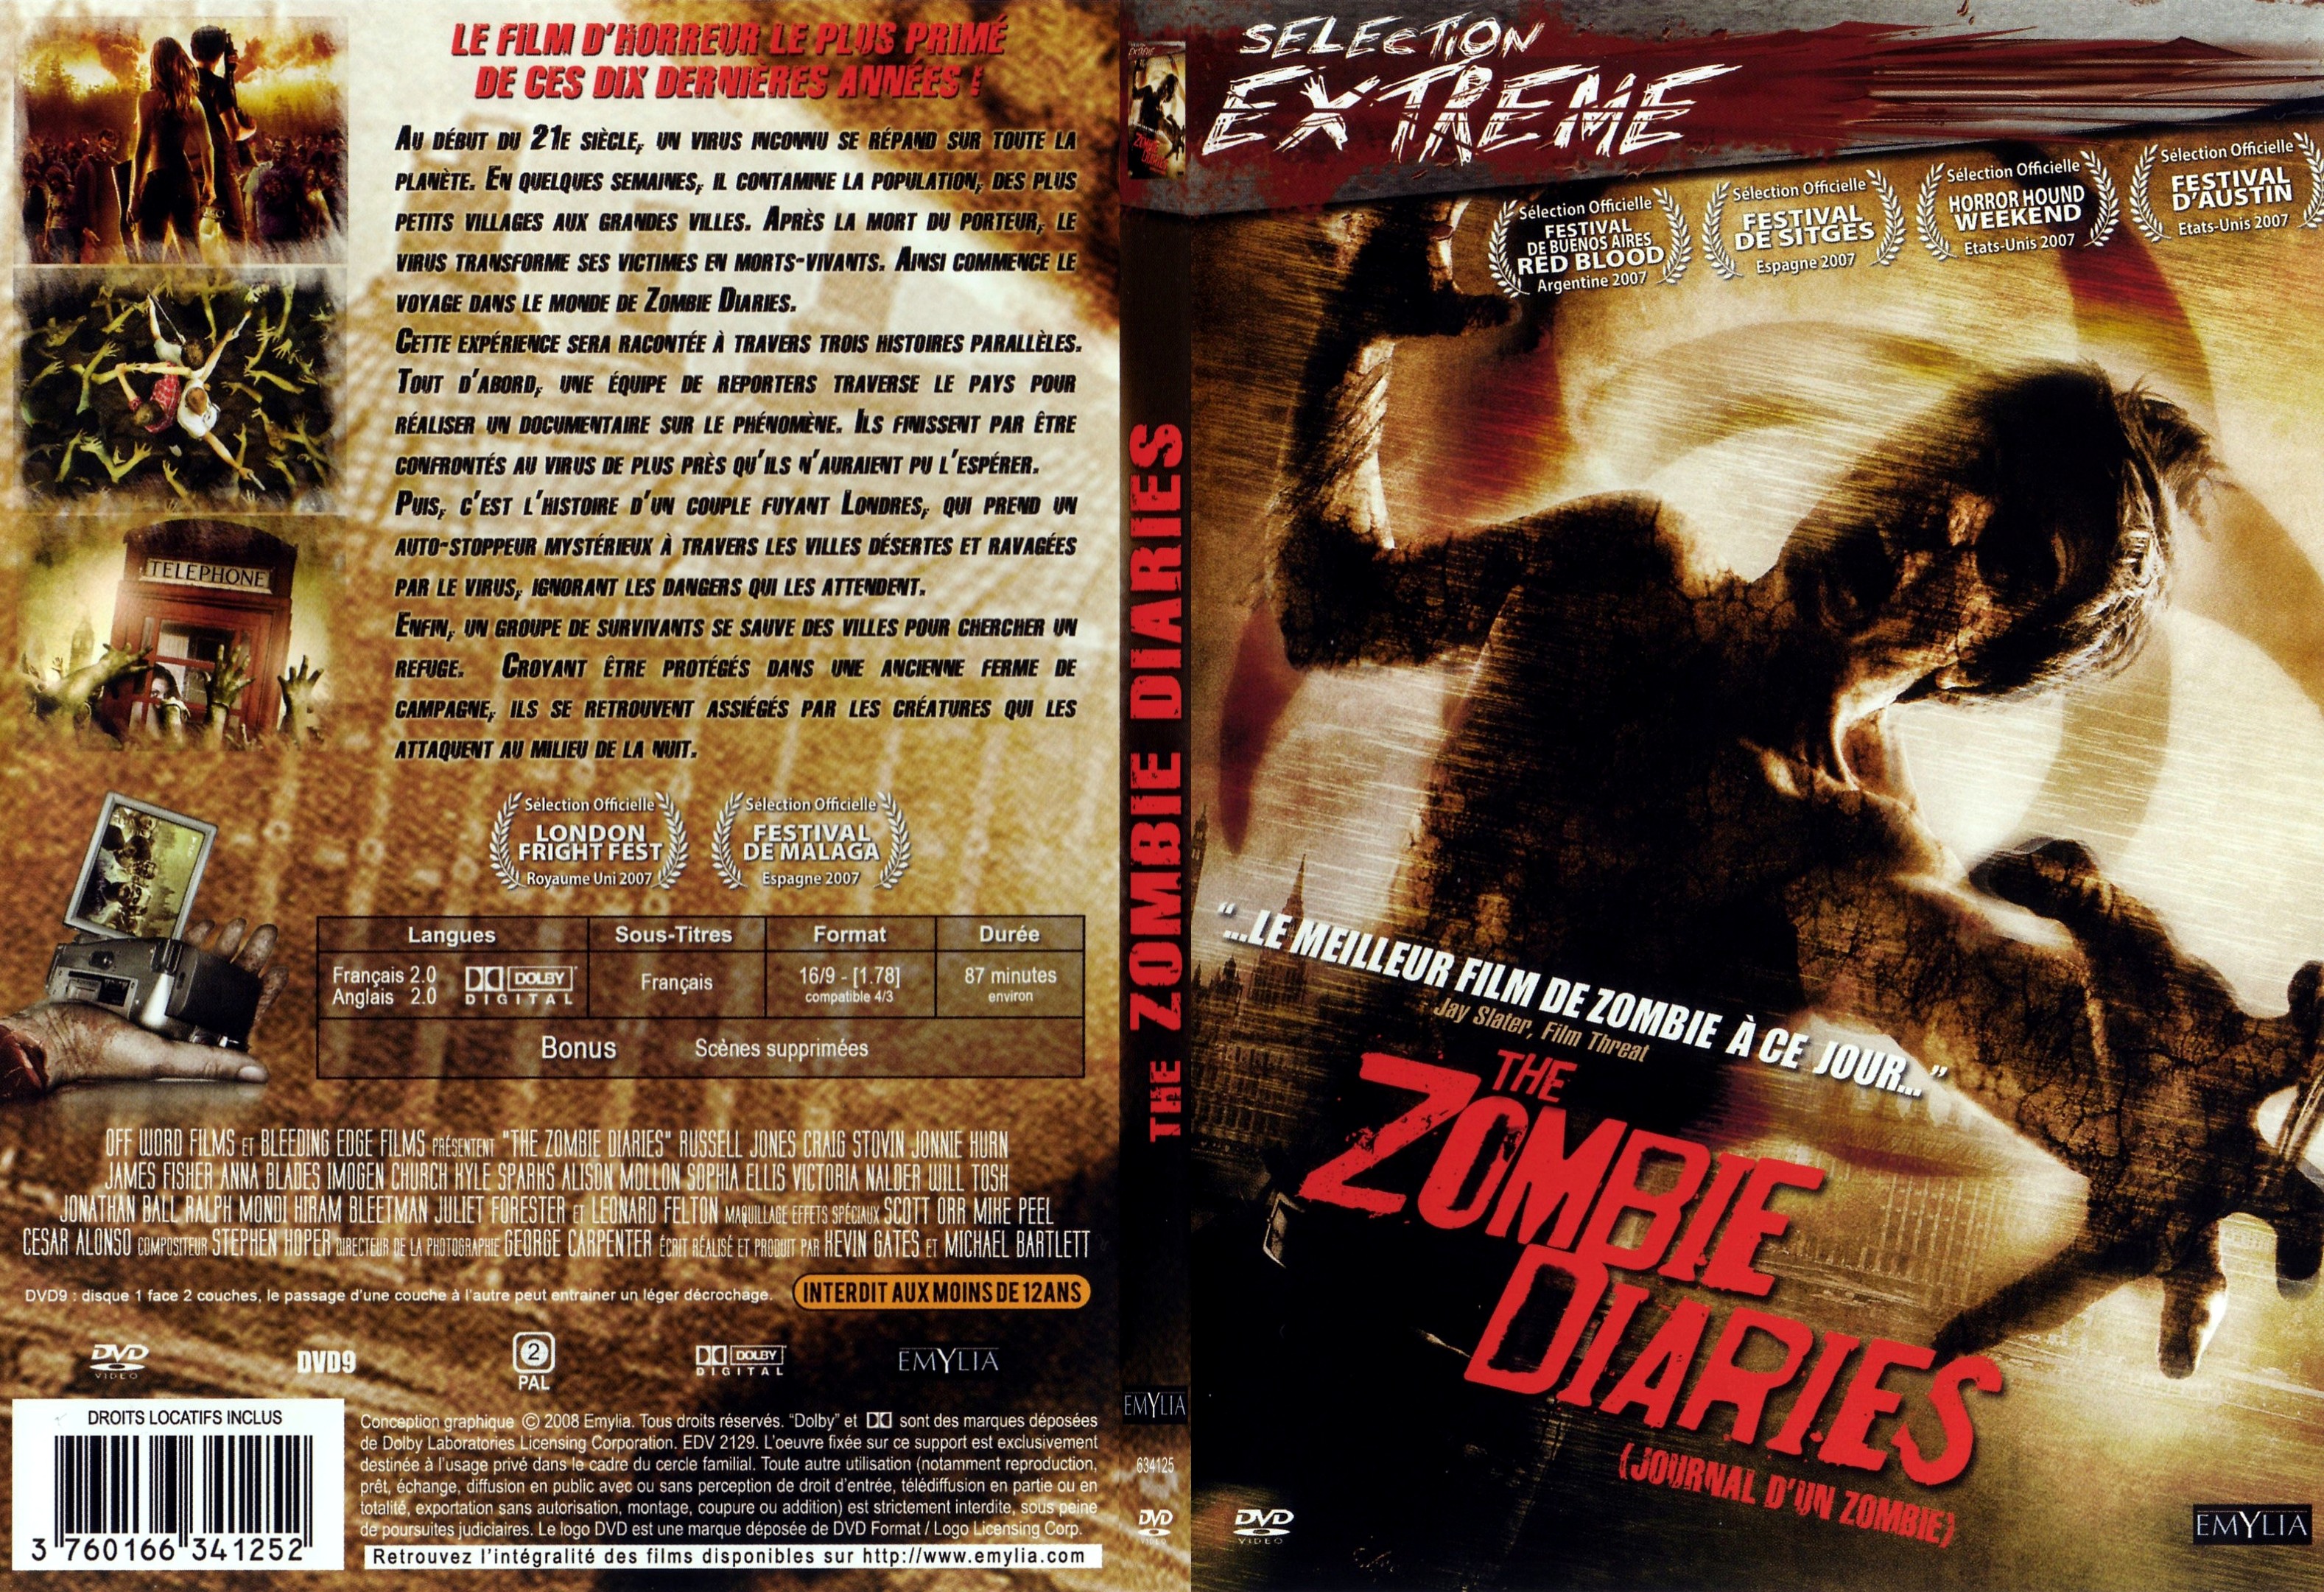 Jaquette DVD The zombie diaries - SLIM